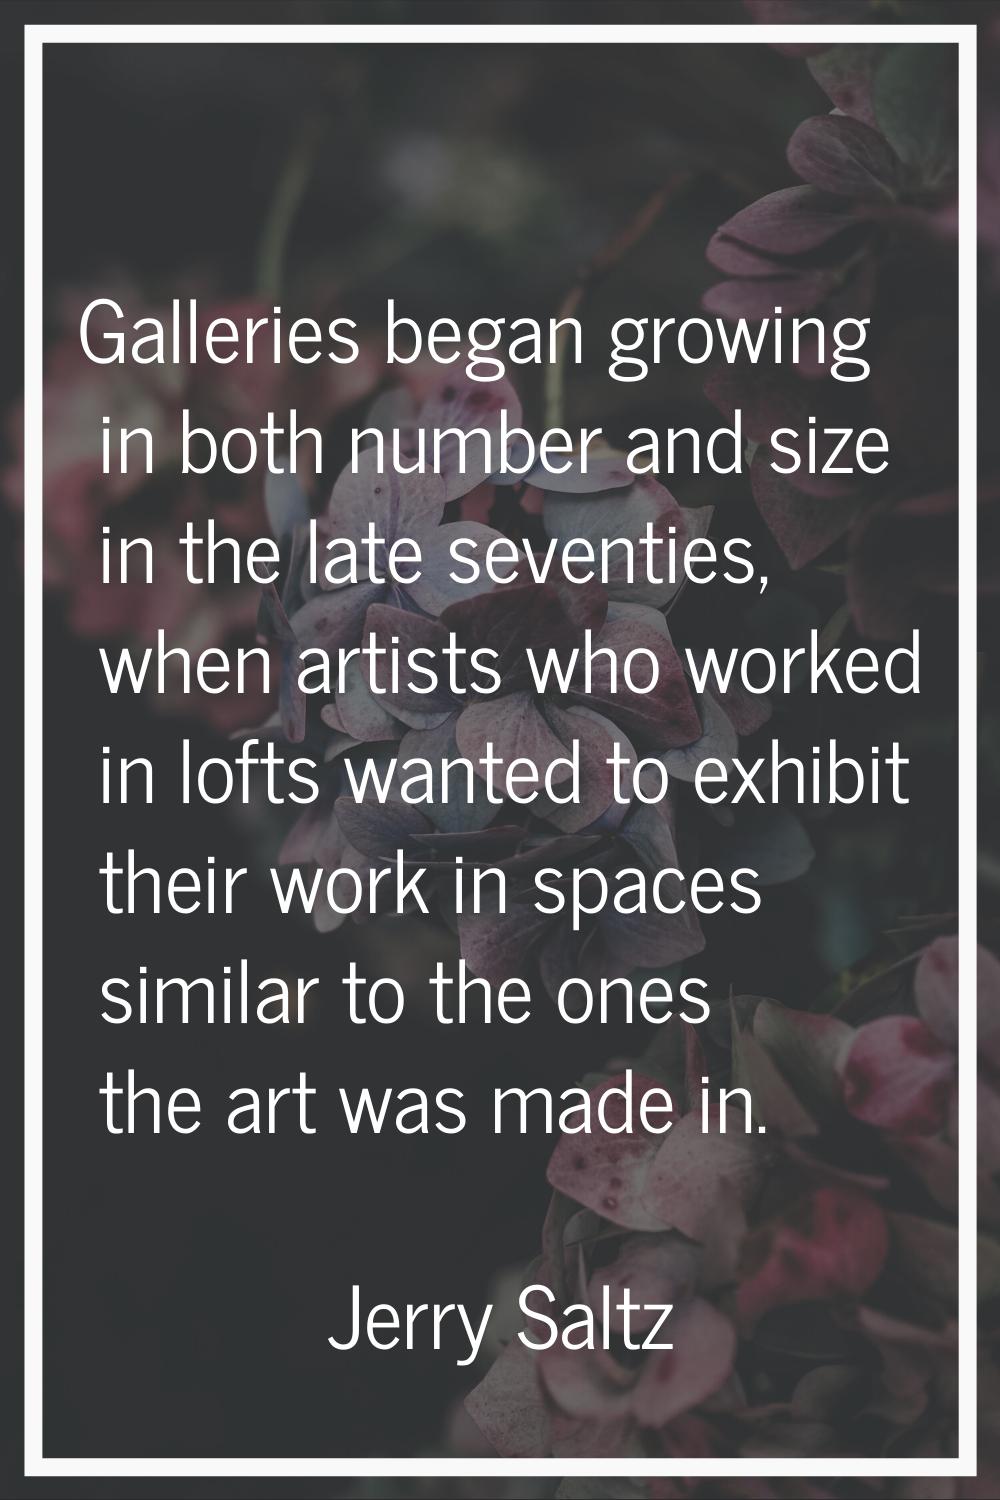 Galleries began growing in both number and size in the late seventies, when artists who worked in l